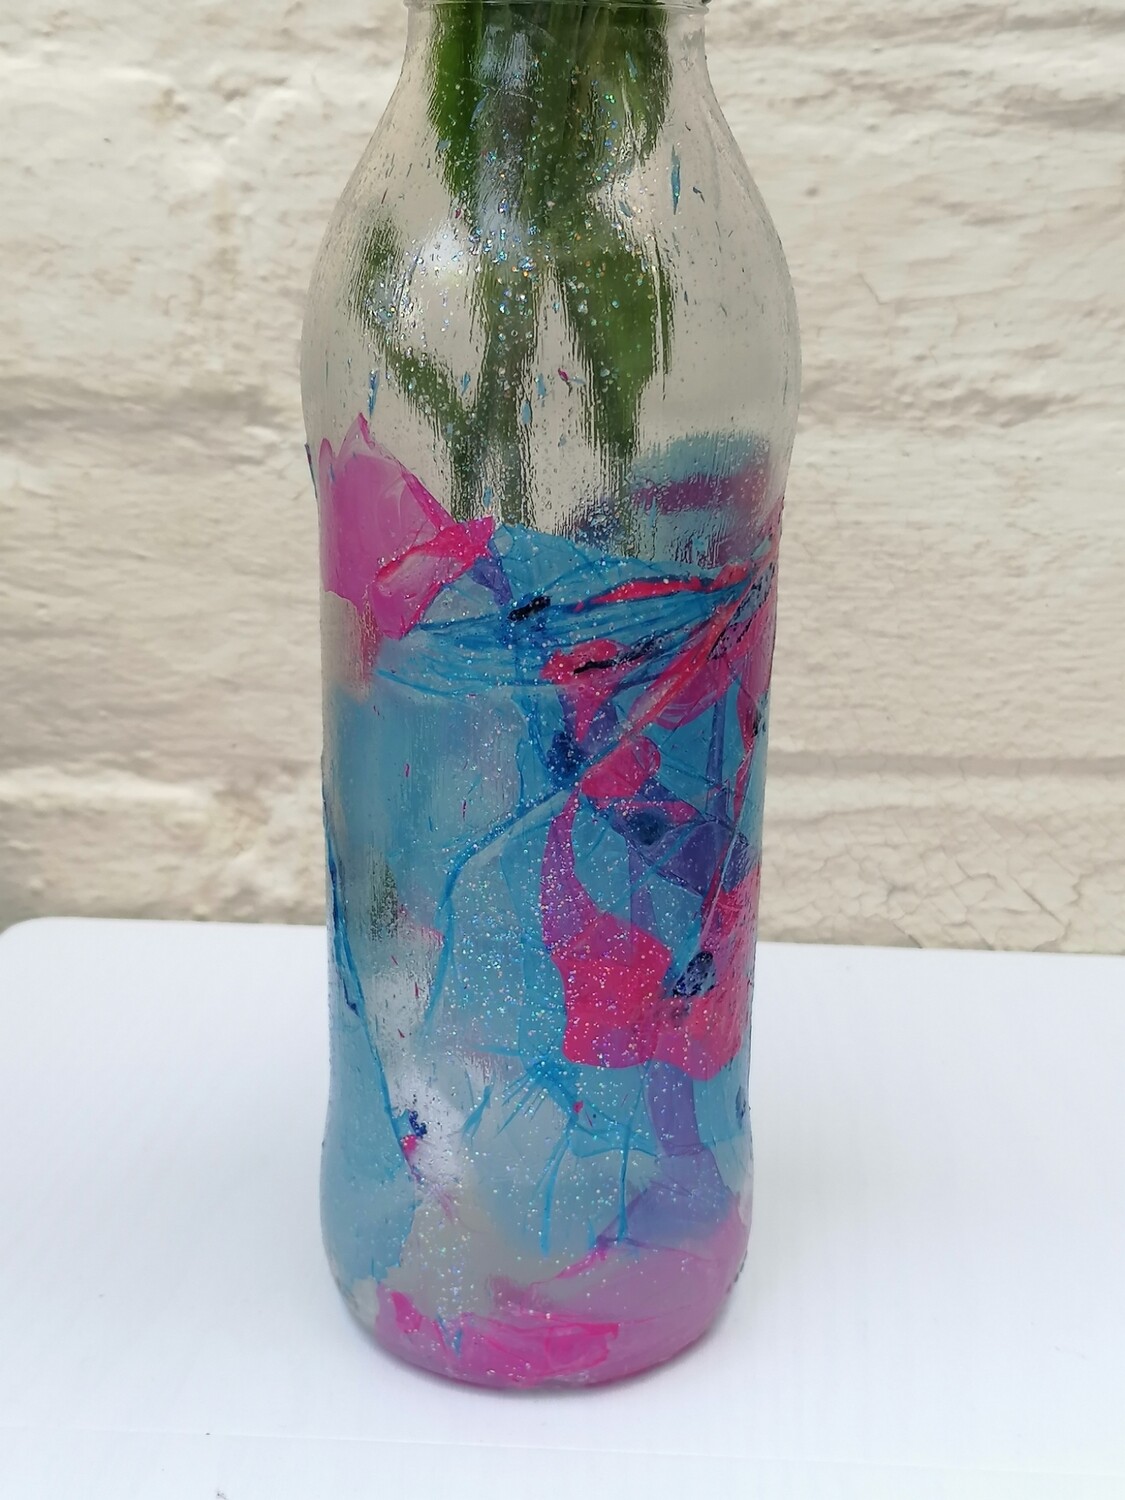 Up Cycled / Recycled Reiki Infused Mixed media Vase Bottle (Blue, Pink, Purple).